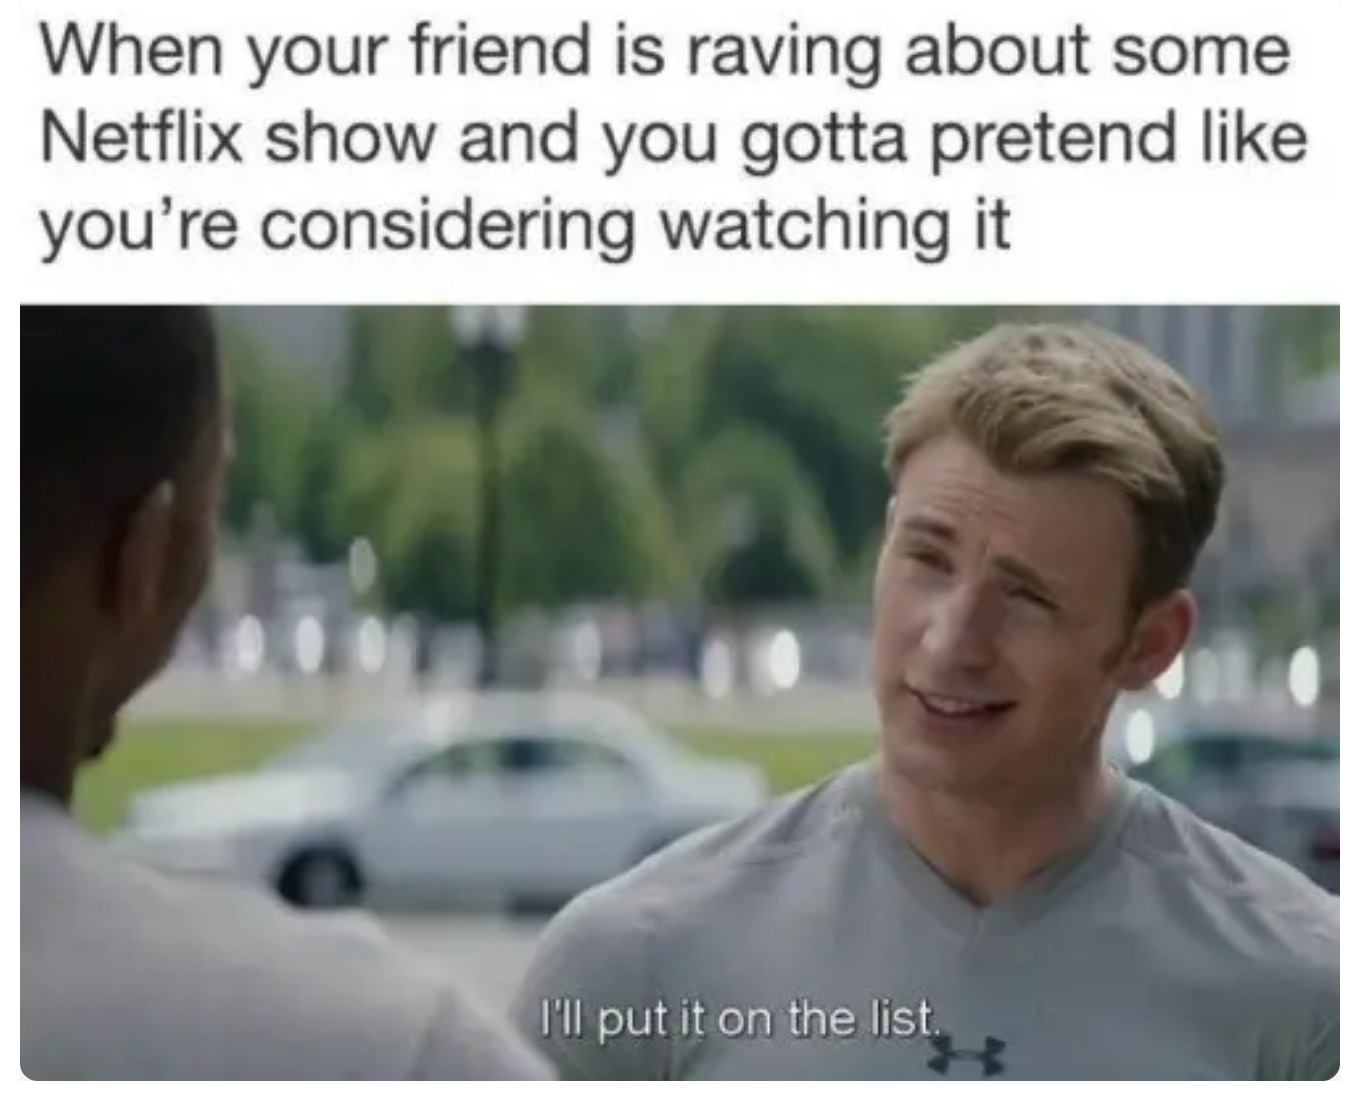 fresh memes - funny memes netflix - When your friend is raving about some Netflix show and you gotta pretend you're considering watching it I'll put it on the list.